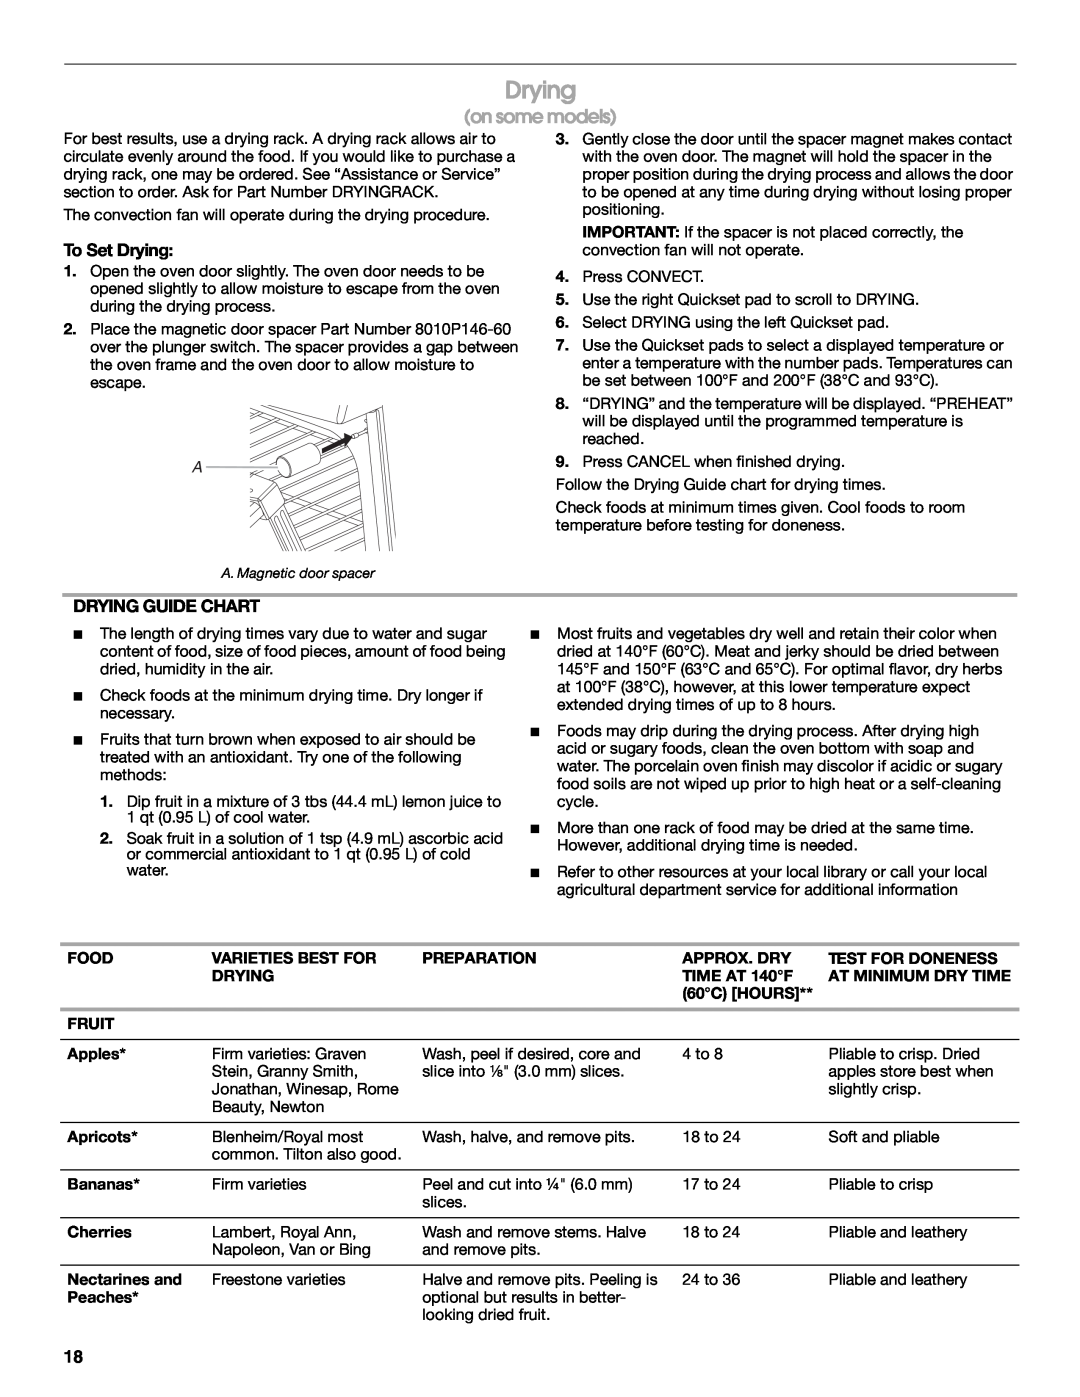 Jenn-Air JGS9900 manual on some models, To Set Drying, Drying Guide Chart 